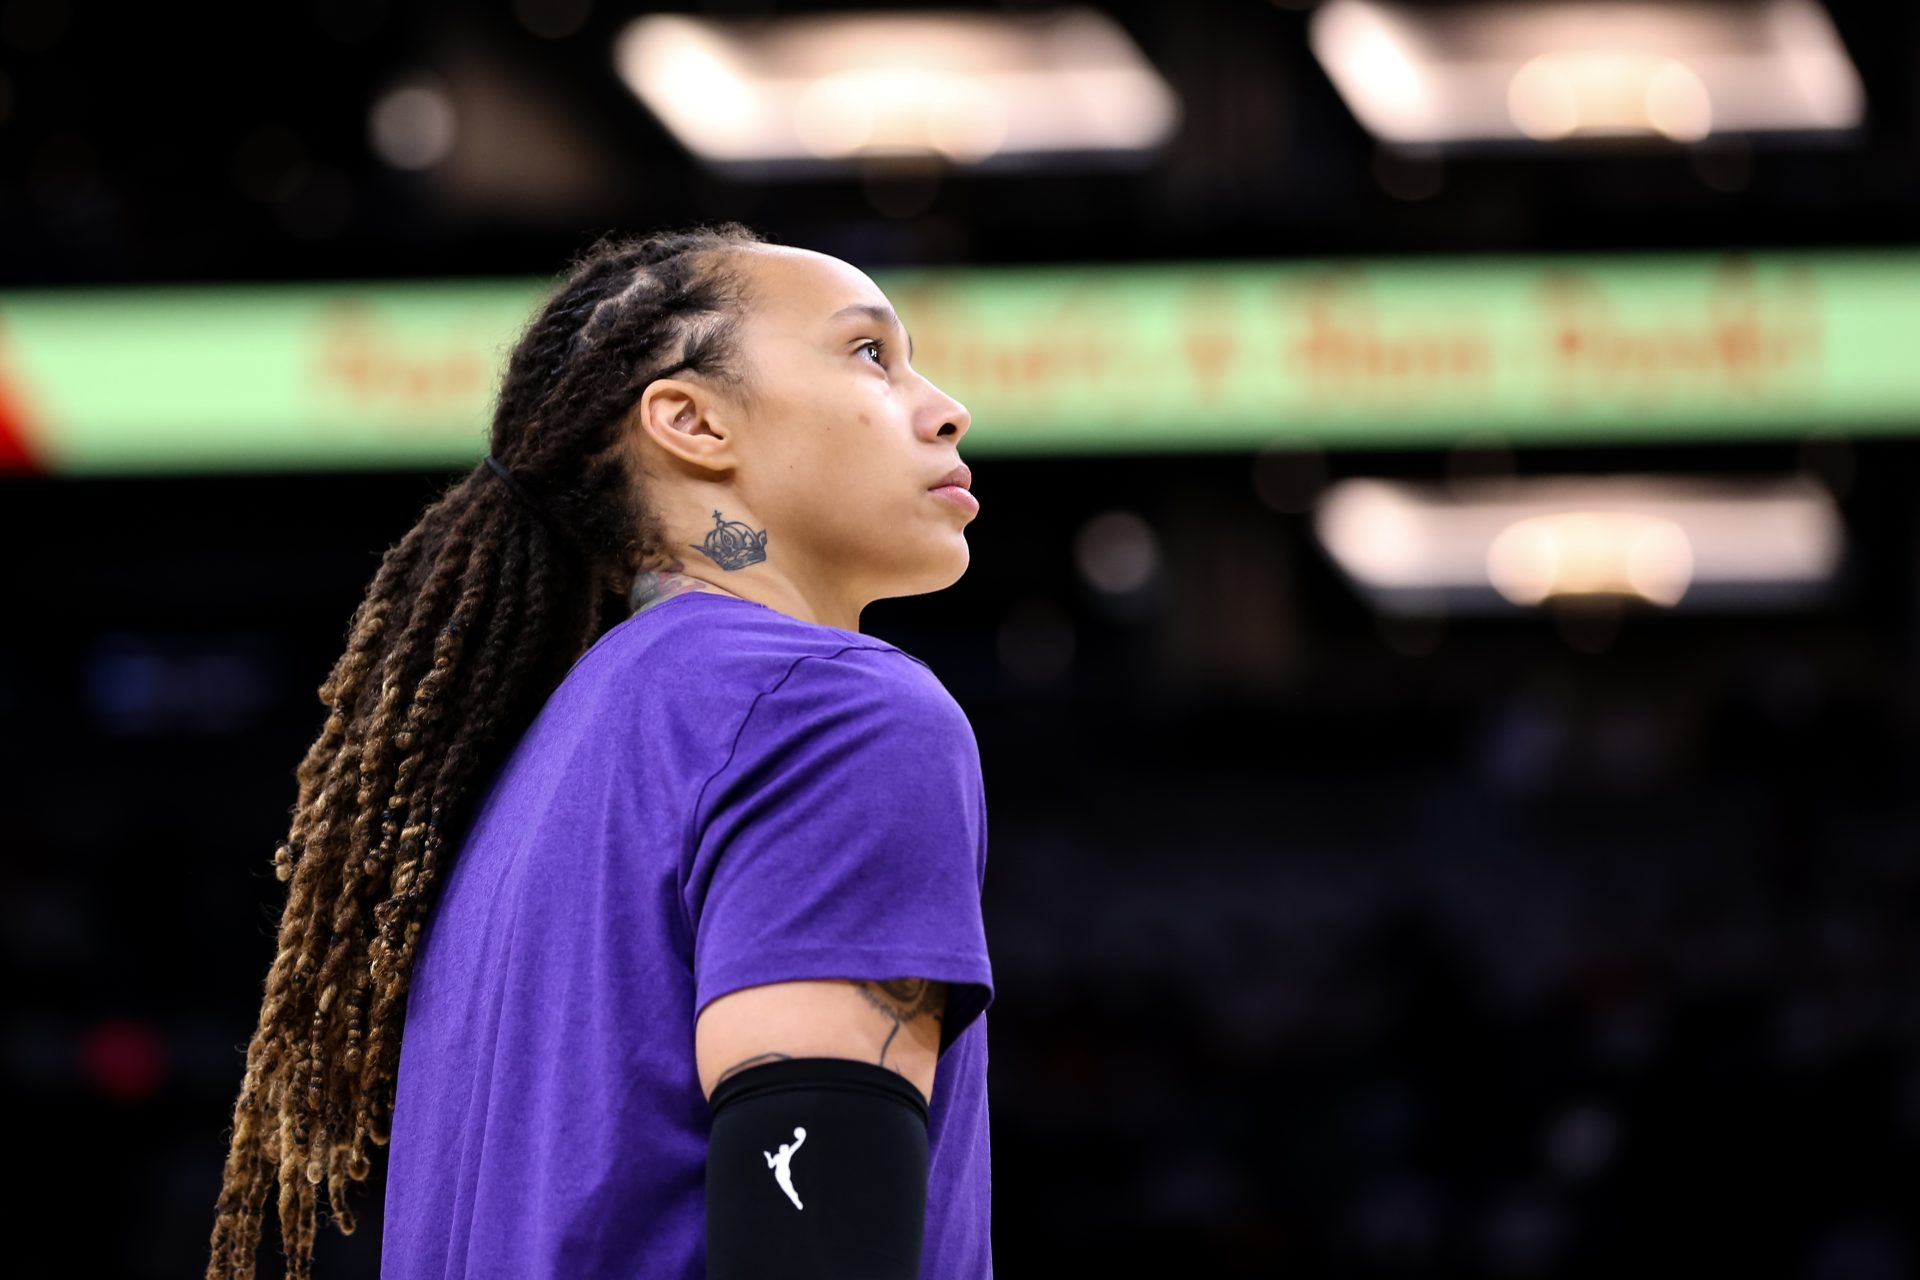 The Griner incident